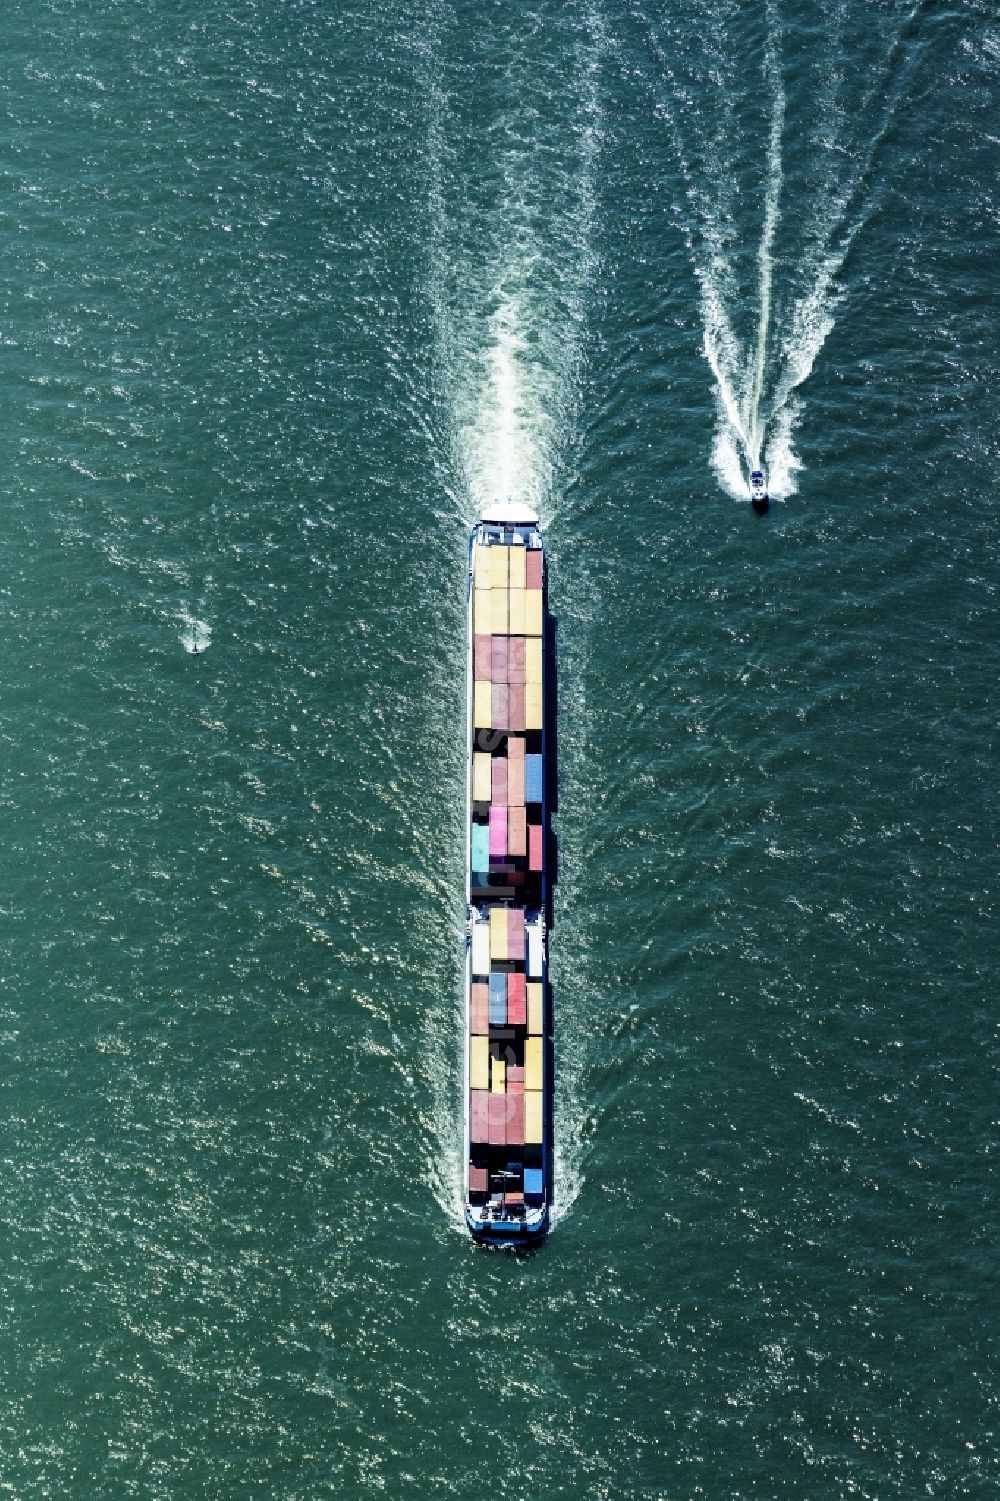 Aerial image Oestrich-Winkel - Sailing container ship on Rhein in Oestrich-Winkel in the state Hesse, Germany